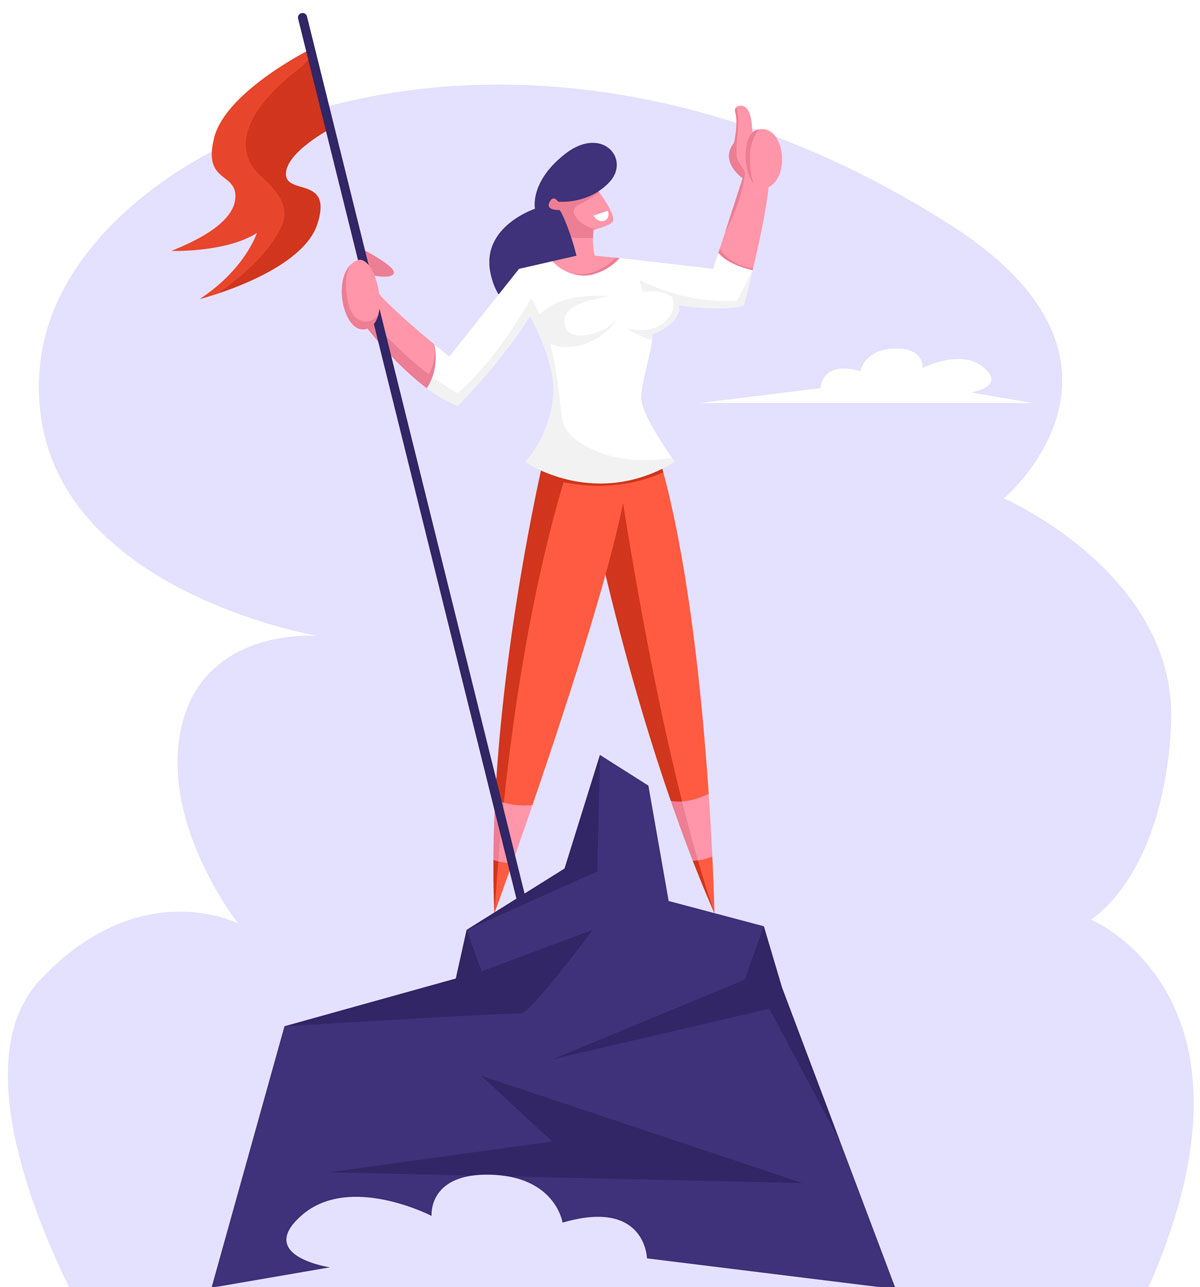 Illustration of a person holding a flag and hand up on top of a mountain